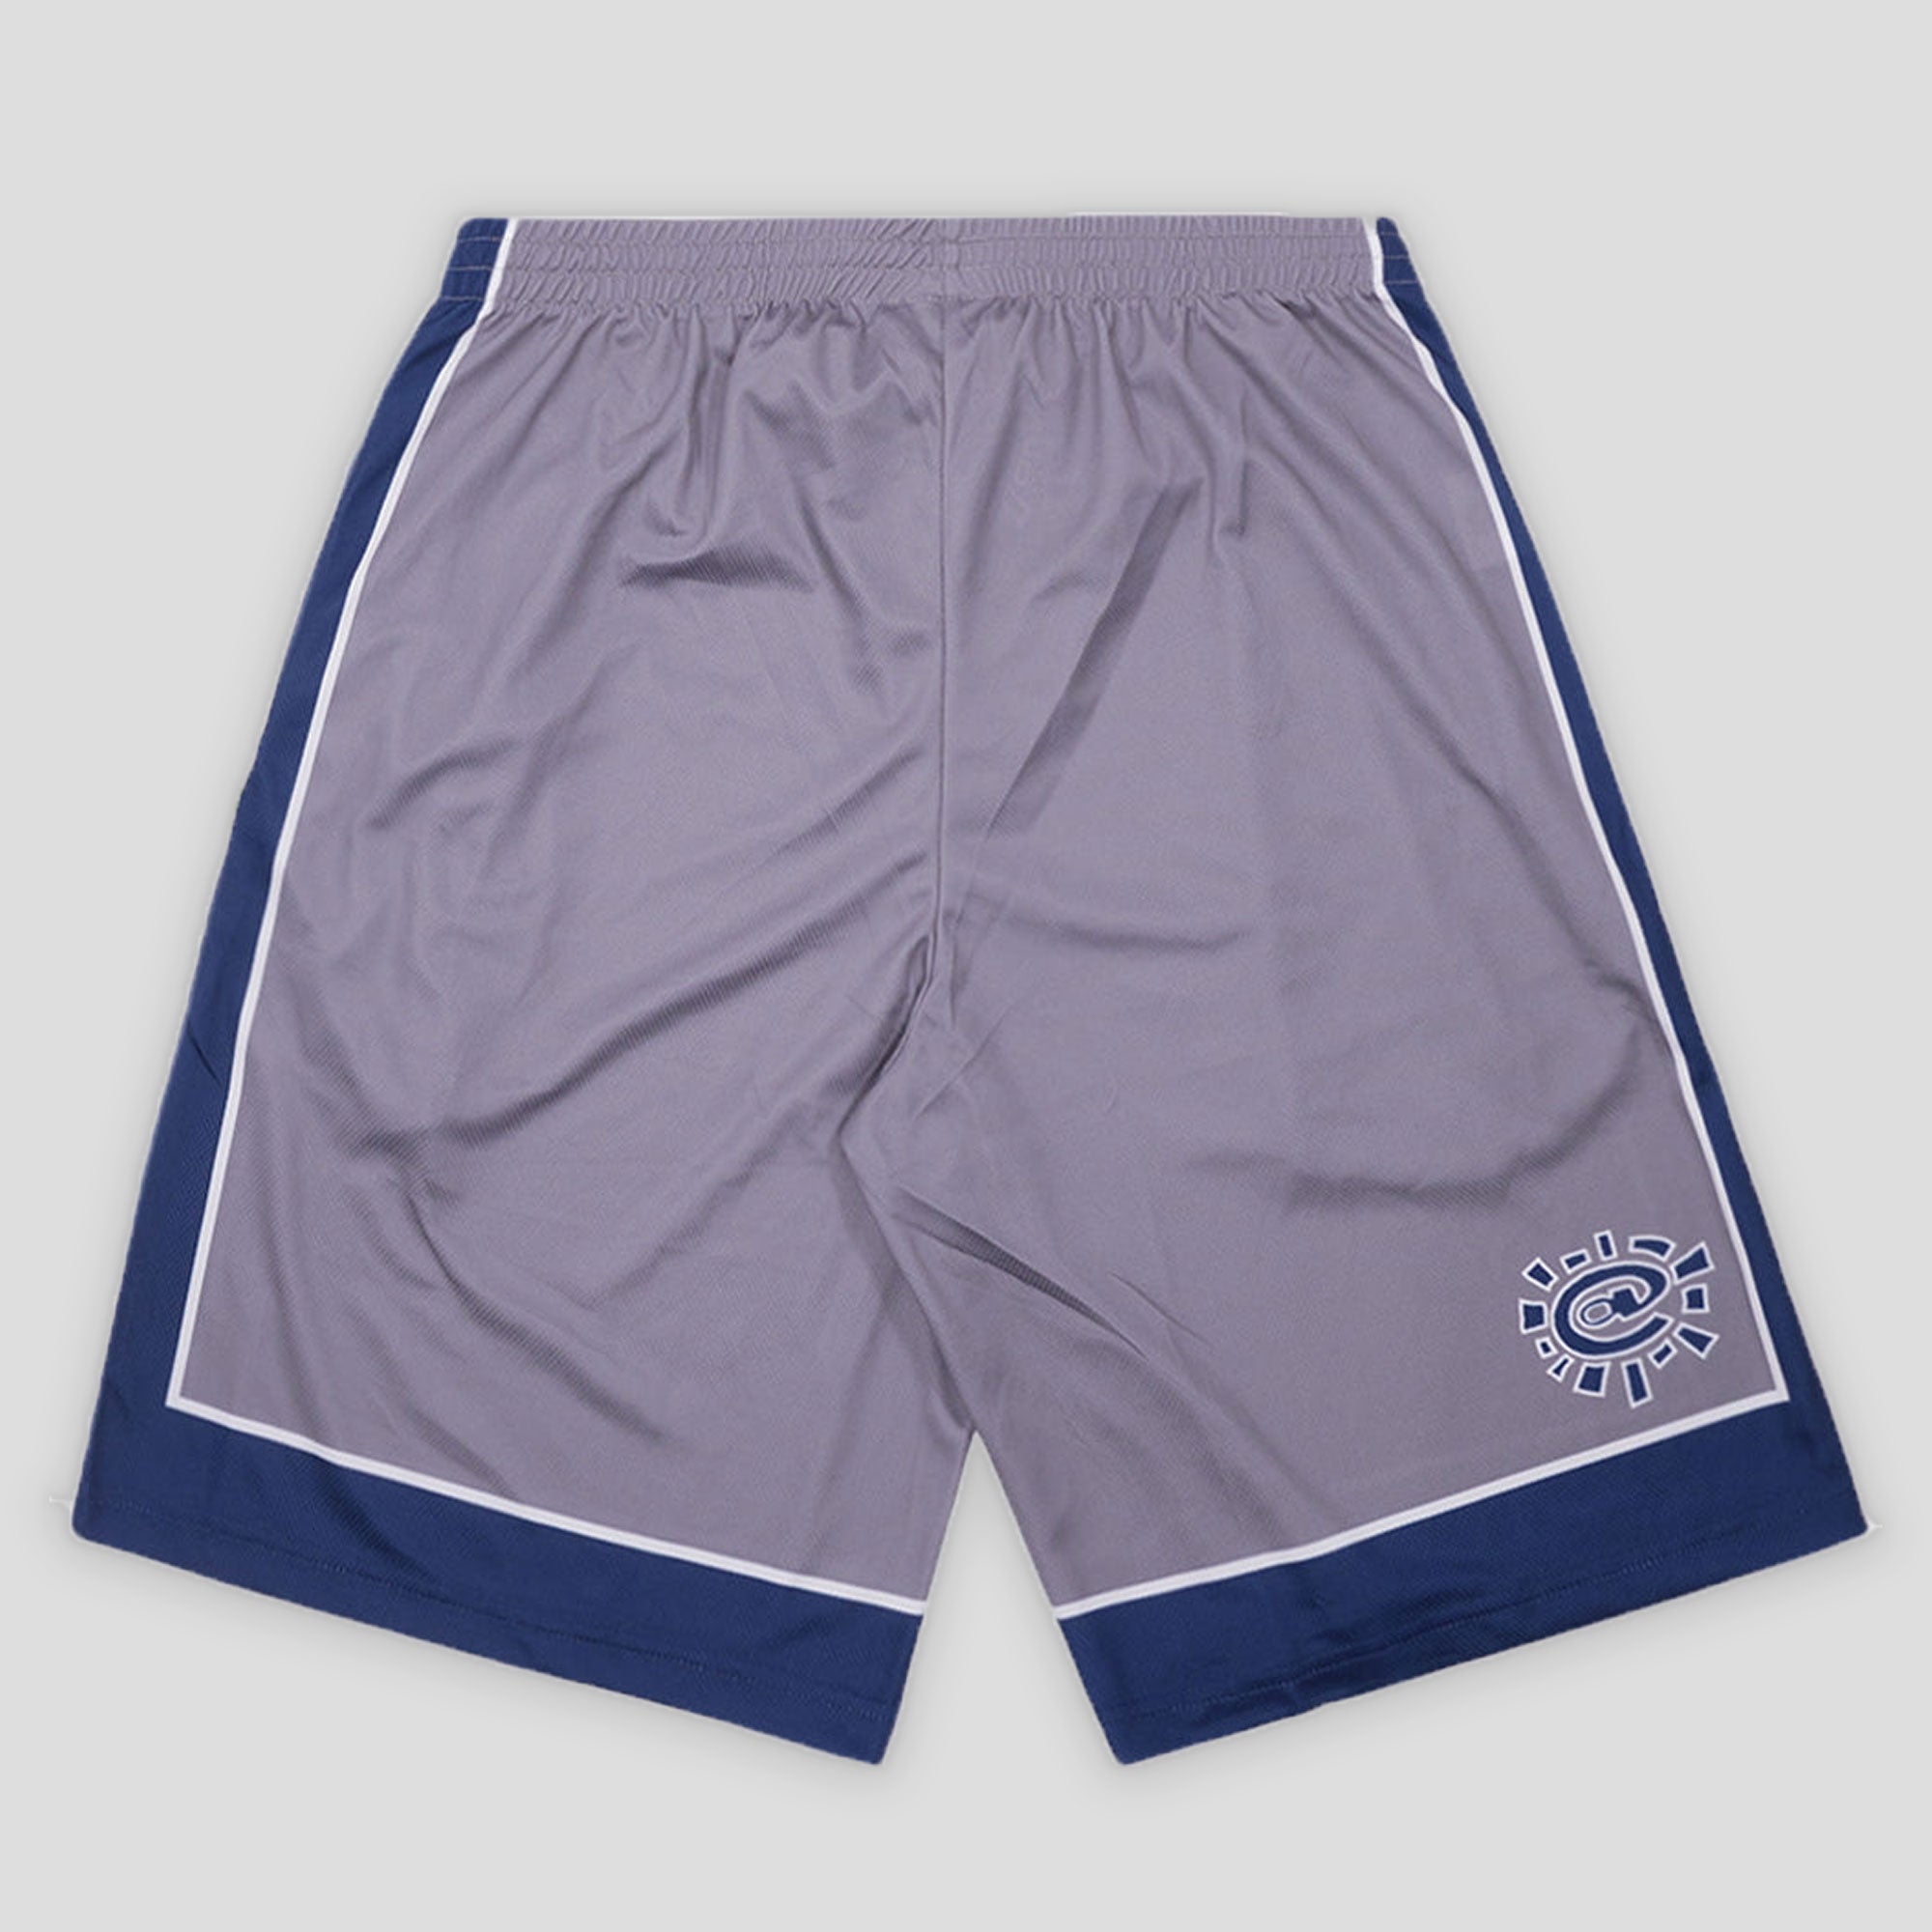 Always Do What You Should Do Court Shorts - Grey/Navy